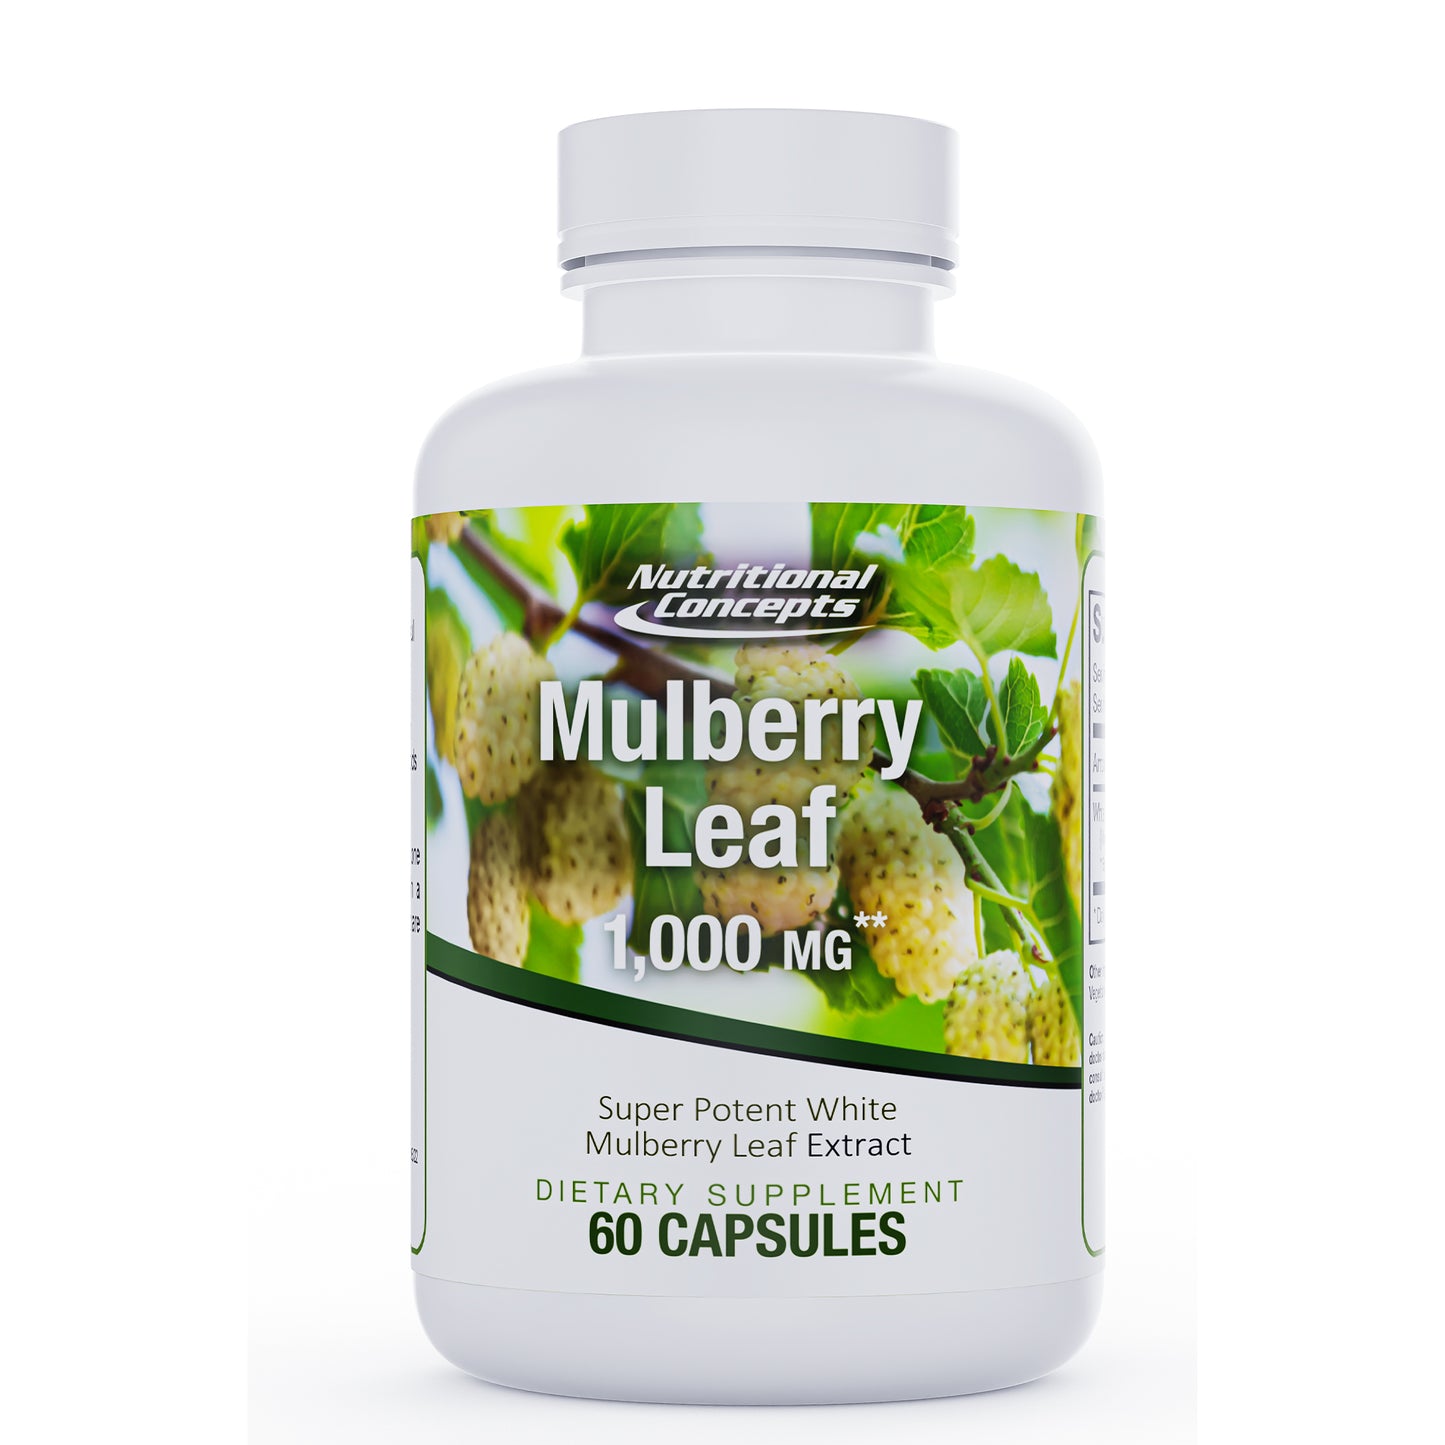 Nutritional Concepts Mulberry Leaf Extract 1000 MG - 60 Capsules (White Mulberry)